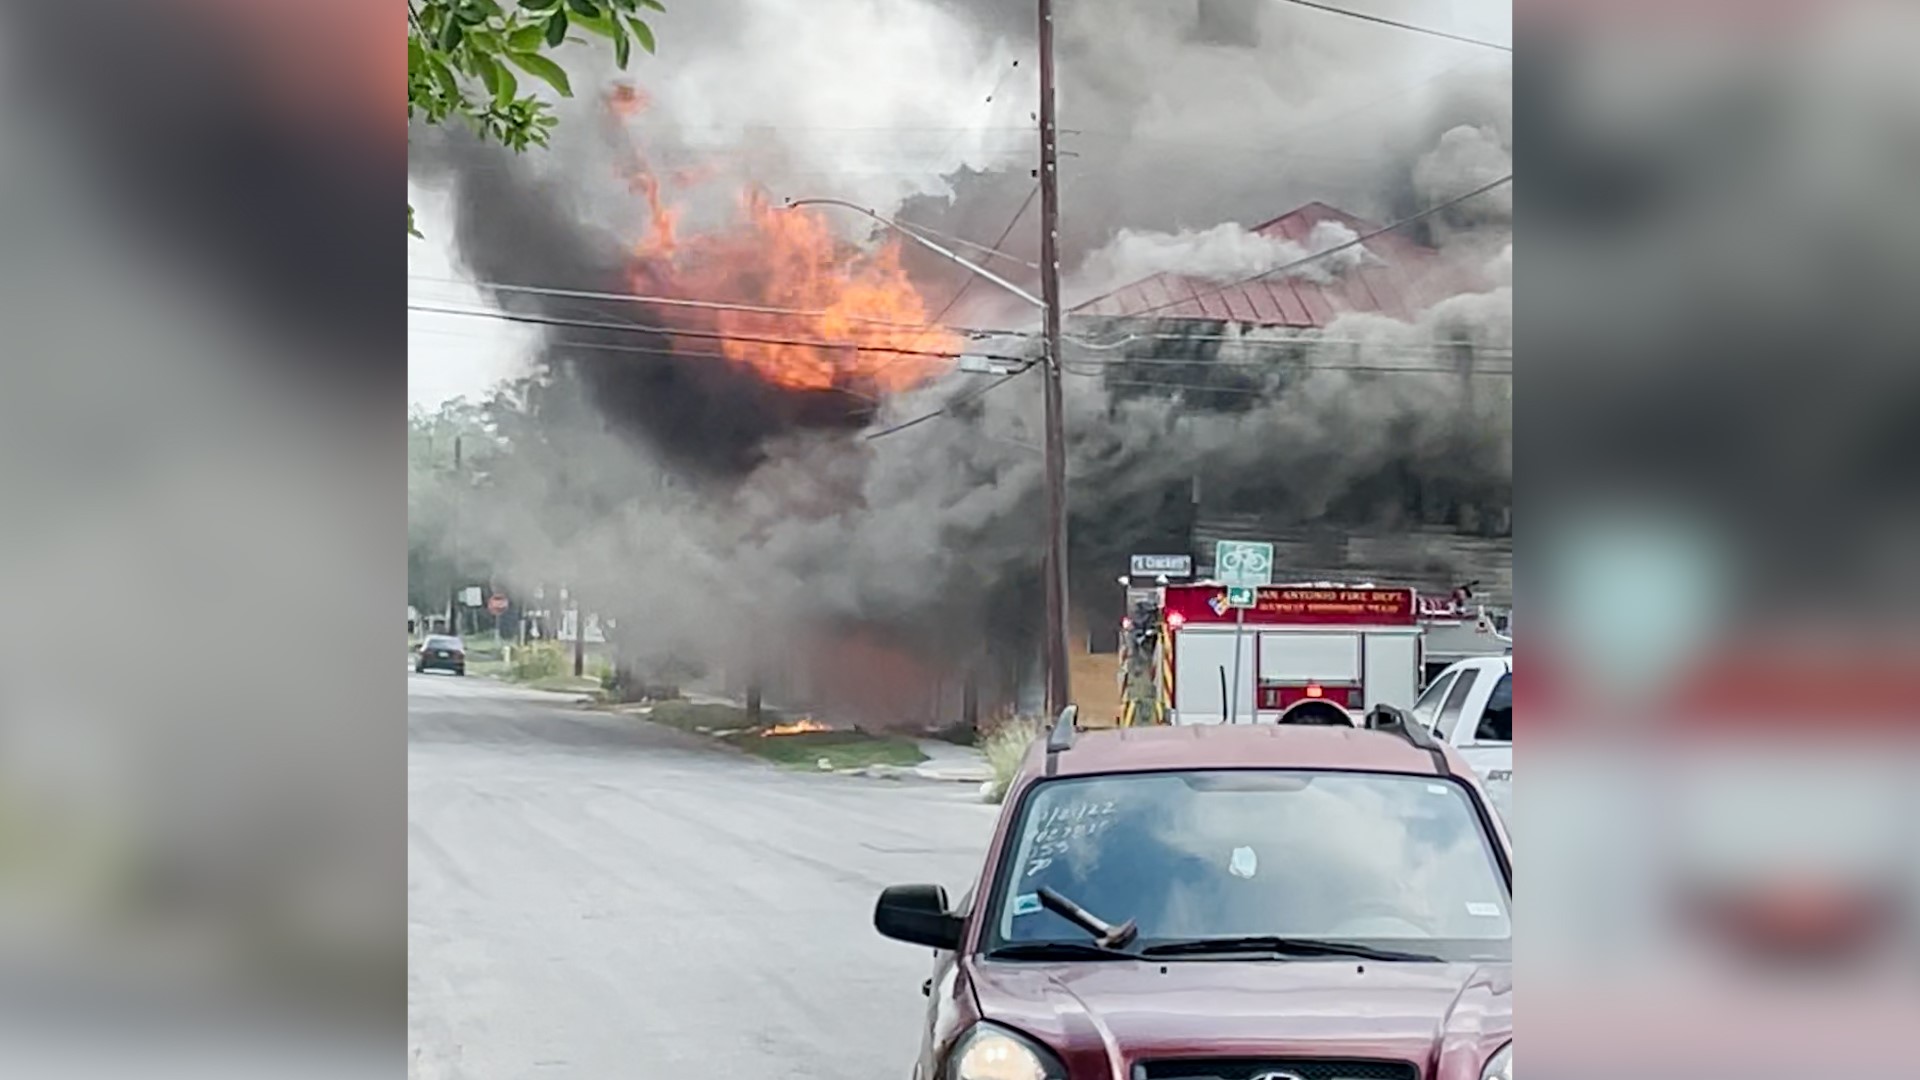 The fire broke out around 9 a.m. on Saturday morning on North Mesquite and East Crockett Street, which is east of downtown. Credit: Ryan Proudfoot